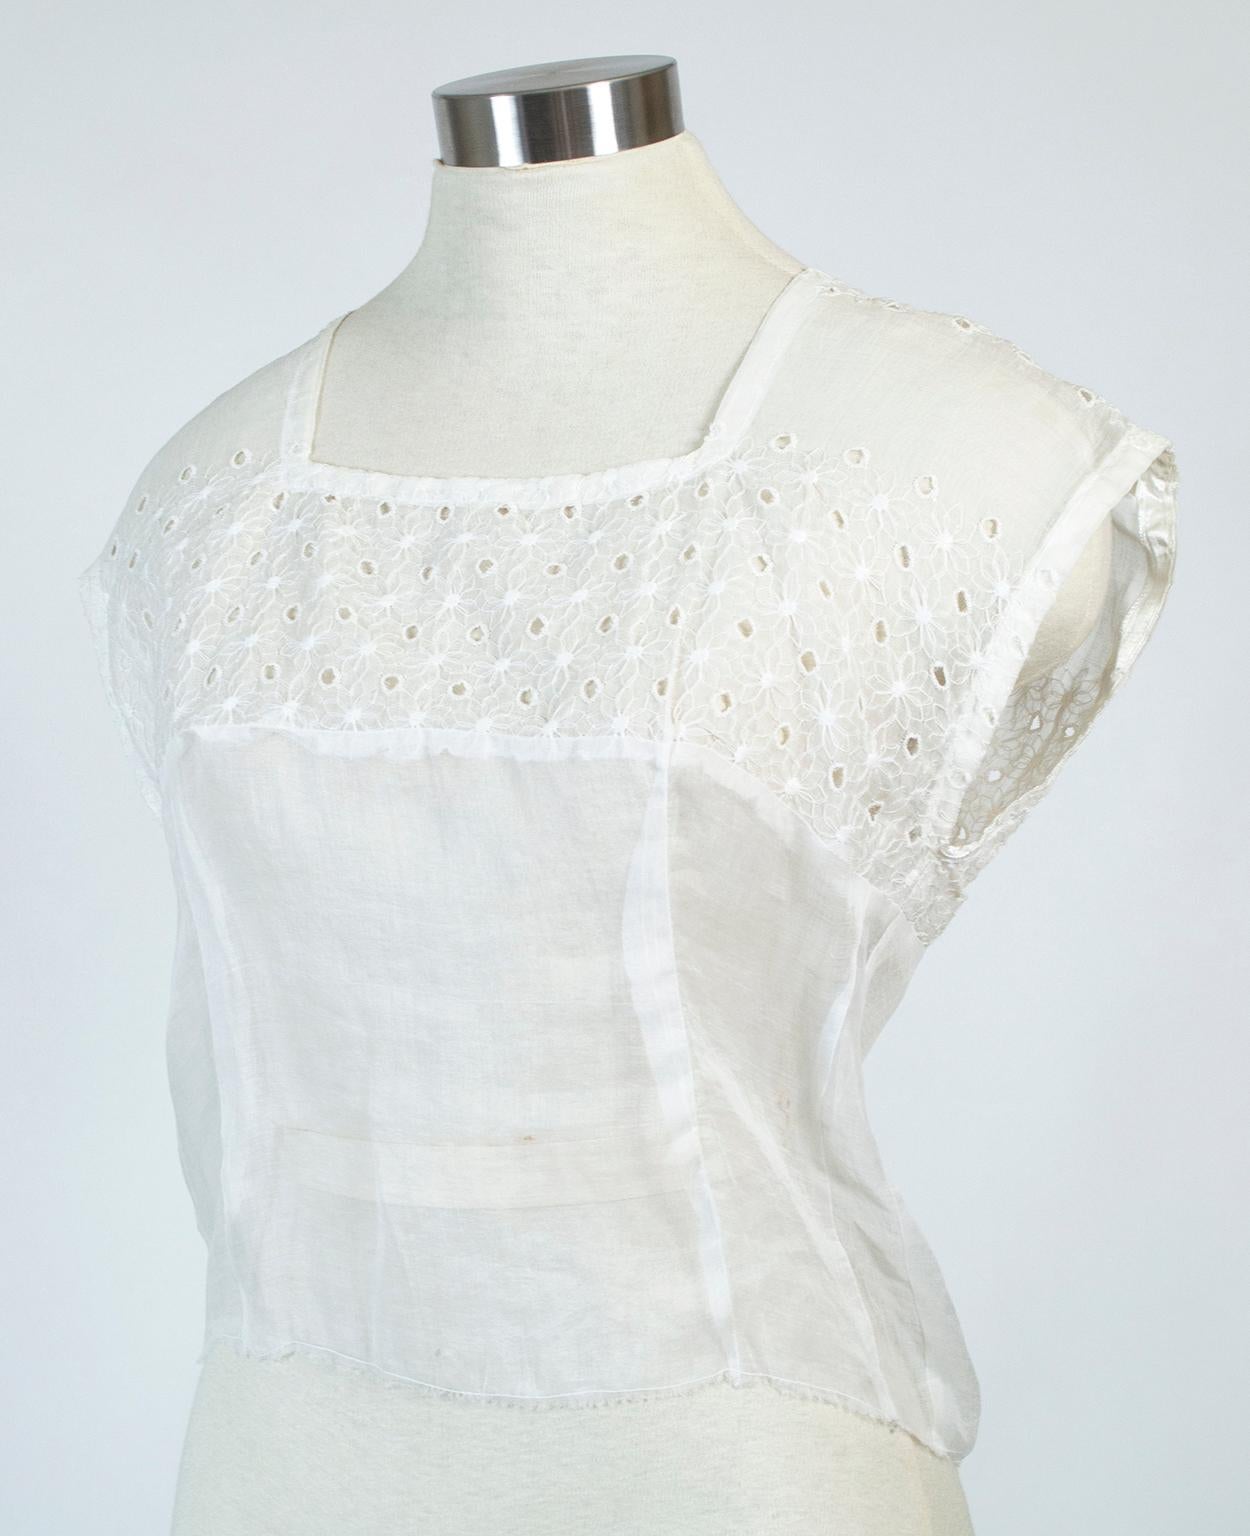 Gray Edwardian Sheer White Organdy Eyelet Cap Sleeve Blouse w Square Neck  – S, 1910s For Sale